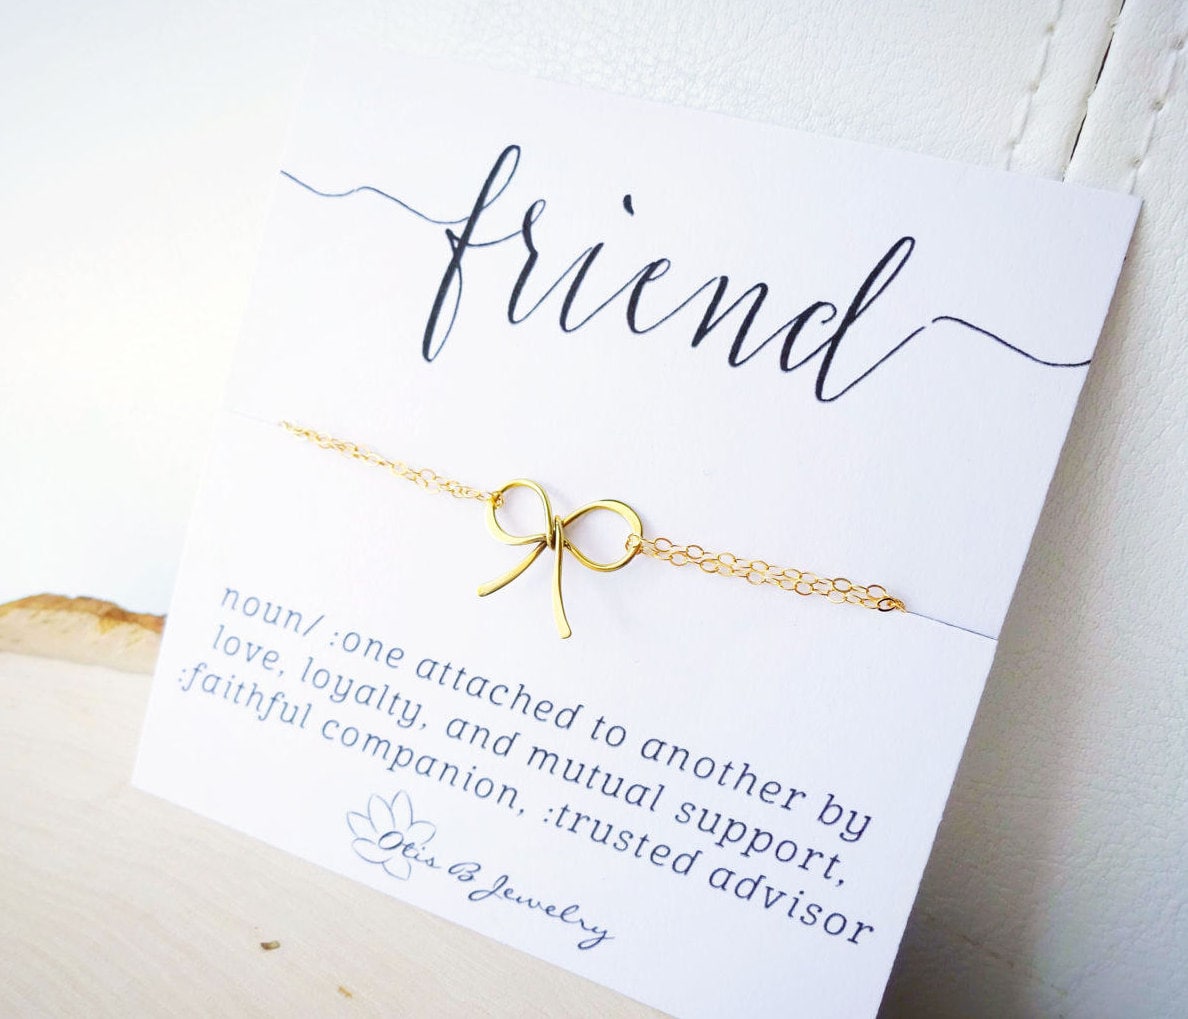 Friendship necklace, bridesmaid jewelry gift idea, minimal layering necklace, tie the knot, bridal jewelry, weddings, adjustable neckkace